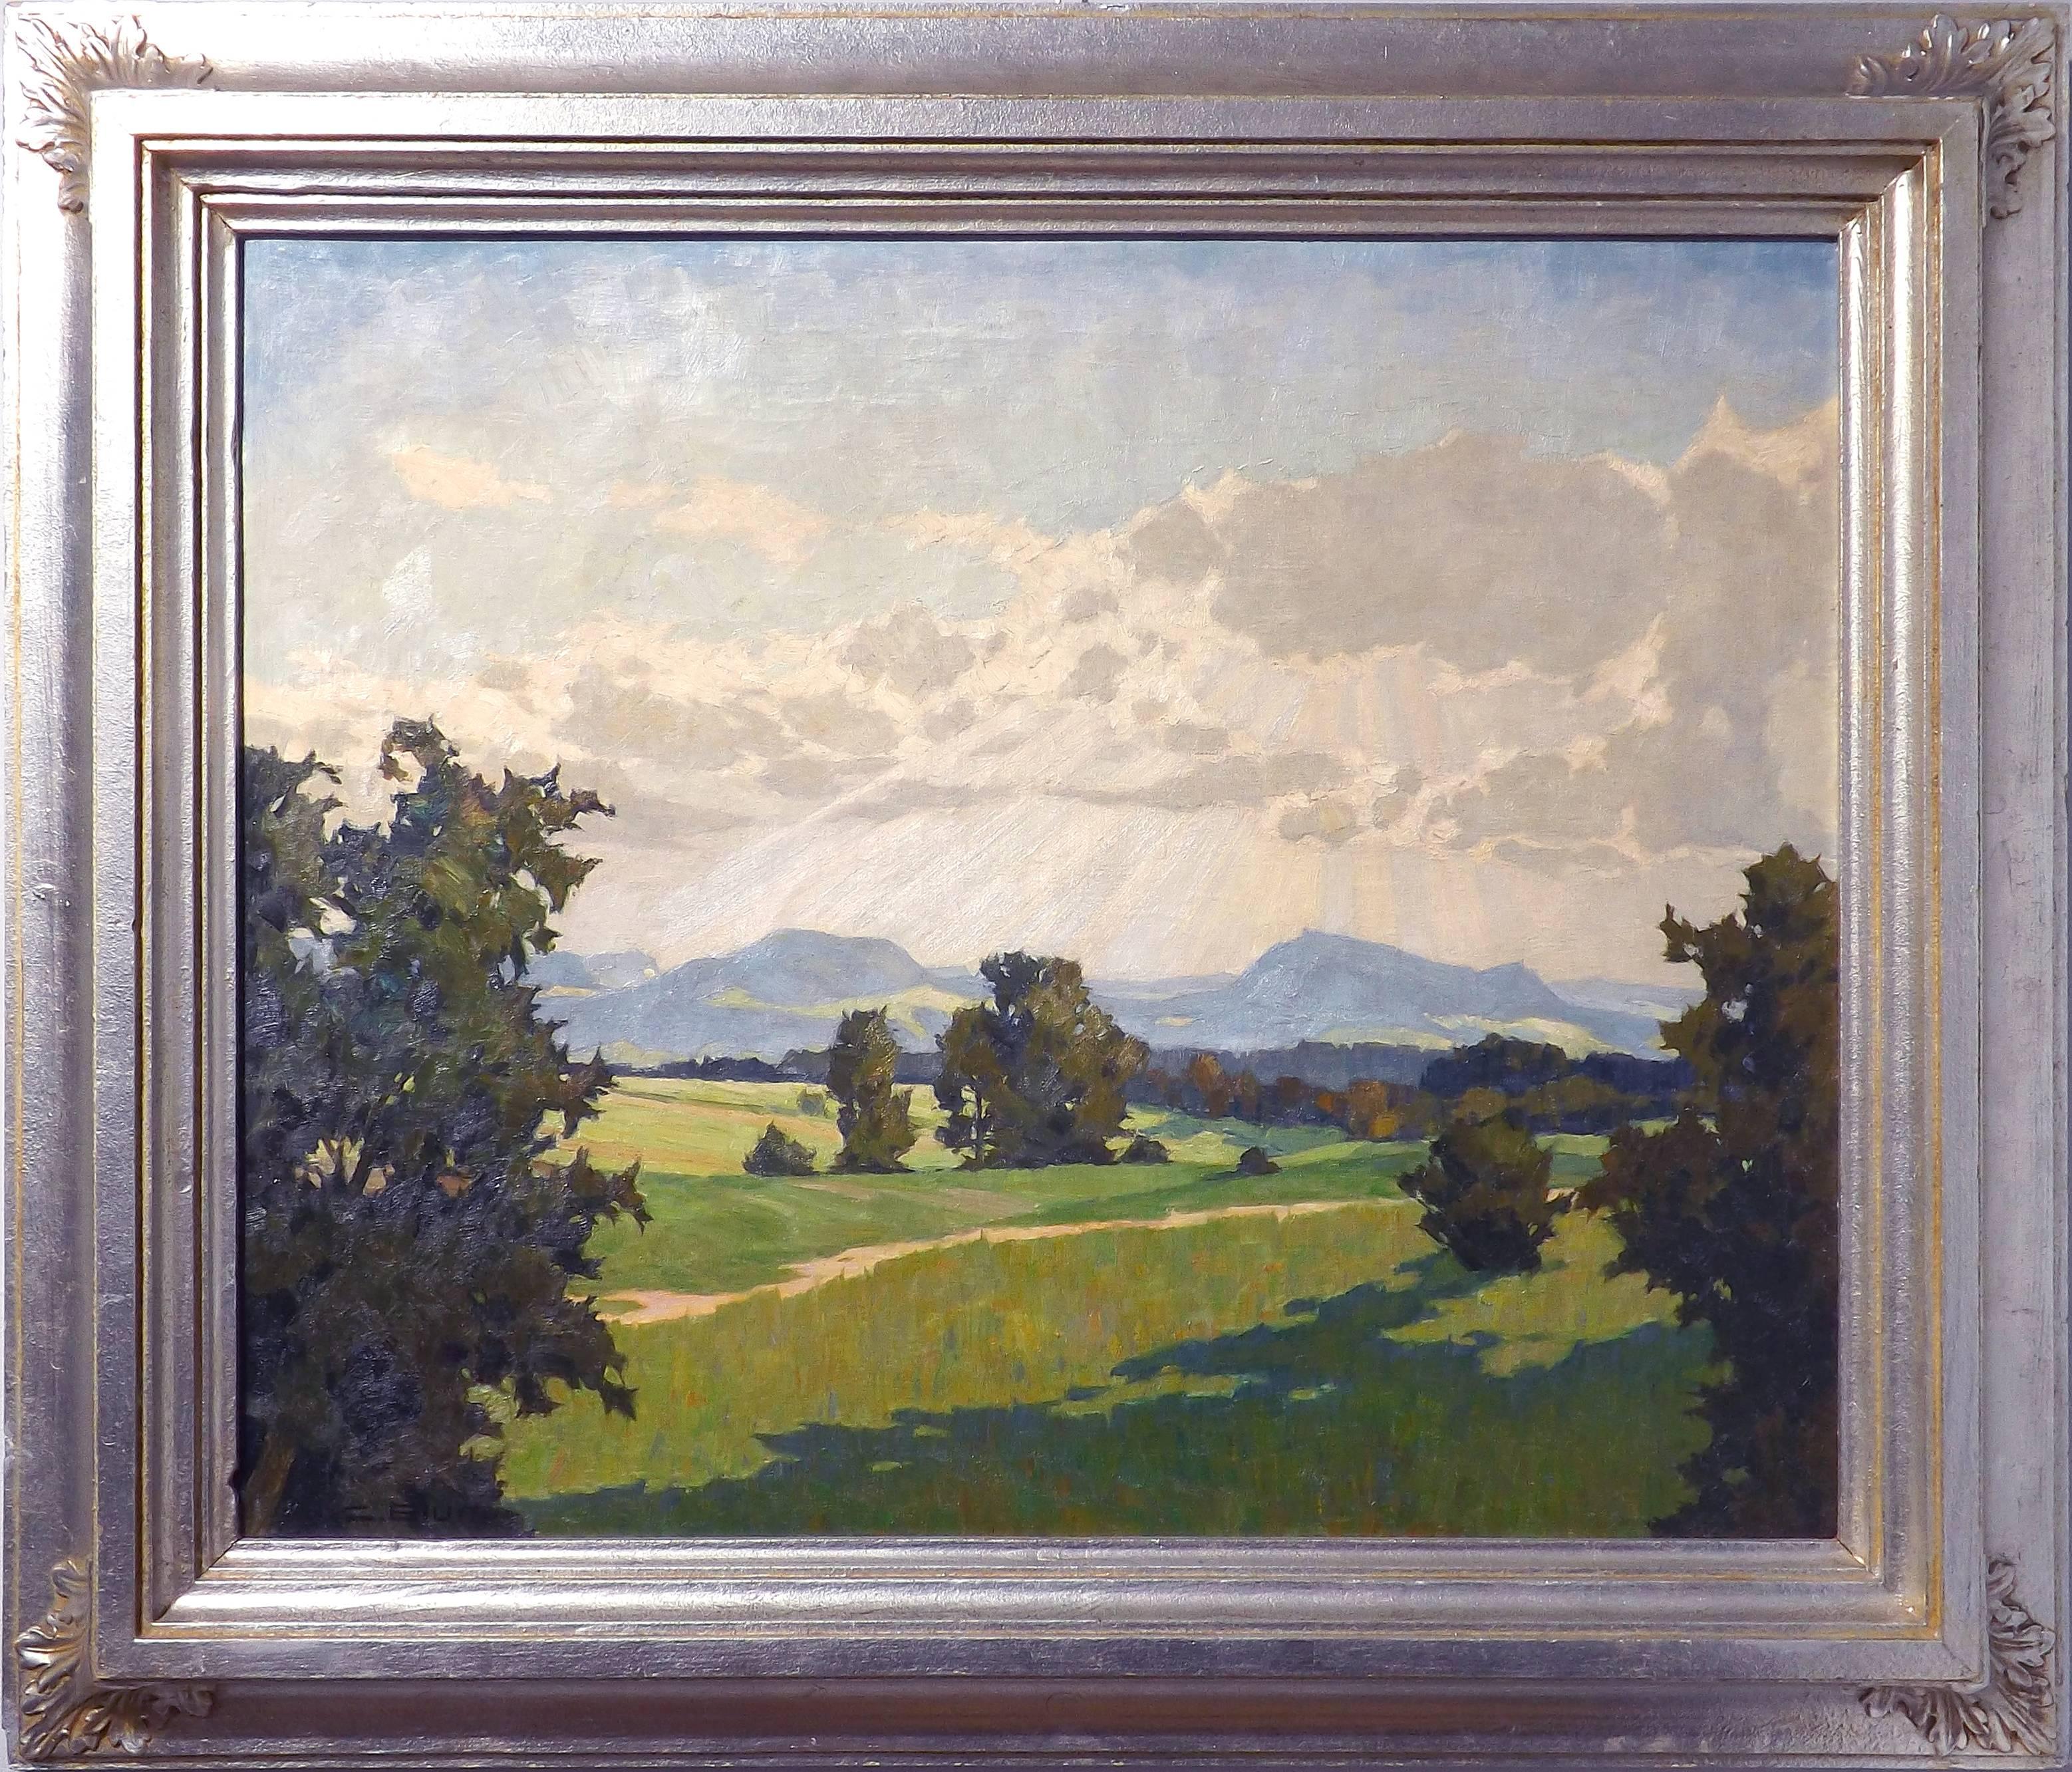 A stunning painting of sunlight breaking through the clouds over rich, green fields. Dark shadows are cast by the trees dotting the landscape, with low mountains rising up in the distance. This painting bears a great resemblance to the Californian